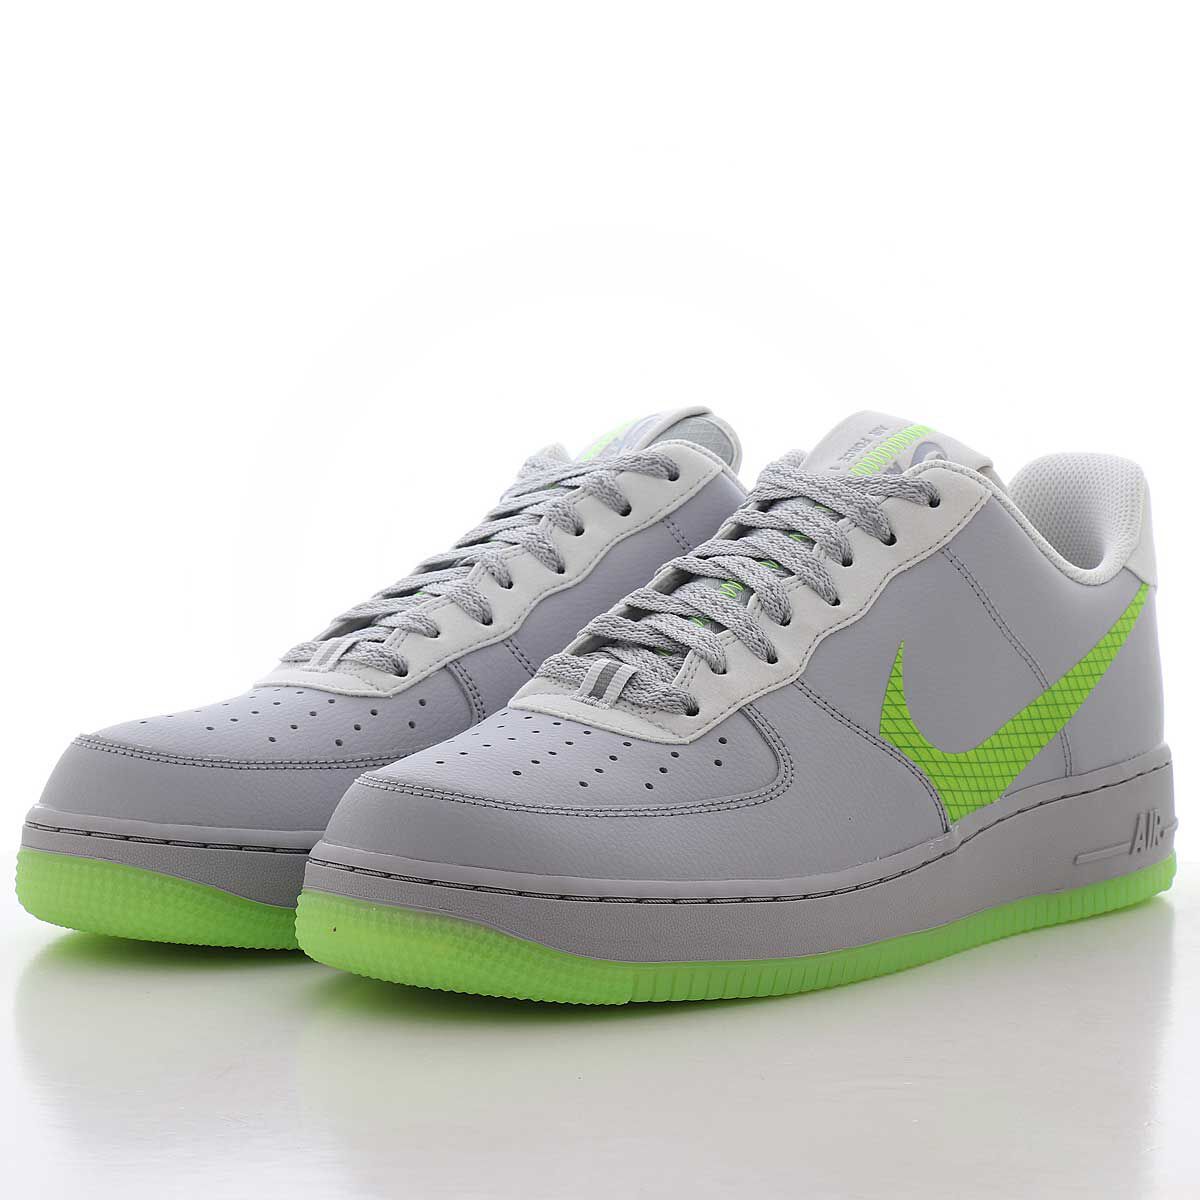 Buy AIR FORCE 1 '07 LV8 3 for N/A 0.0 